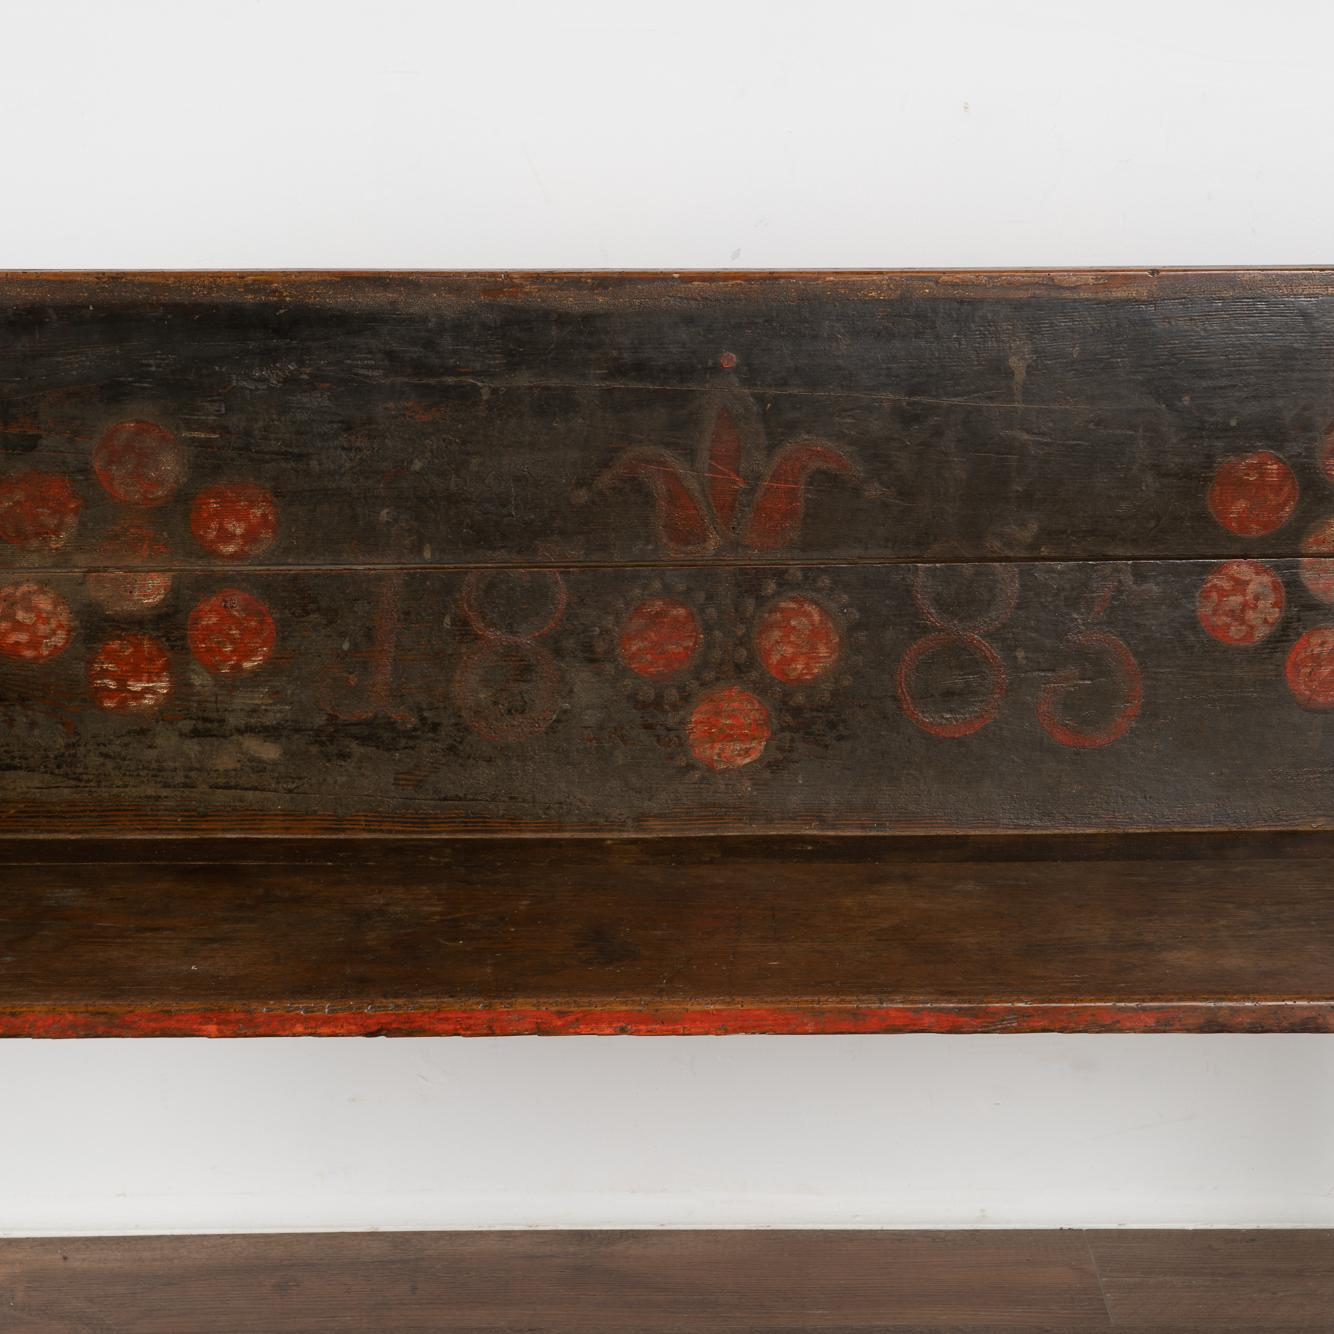 Original Hand Painted Narrow Bench with Red Flowers, Hungary, Dated 1883 1